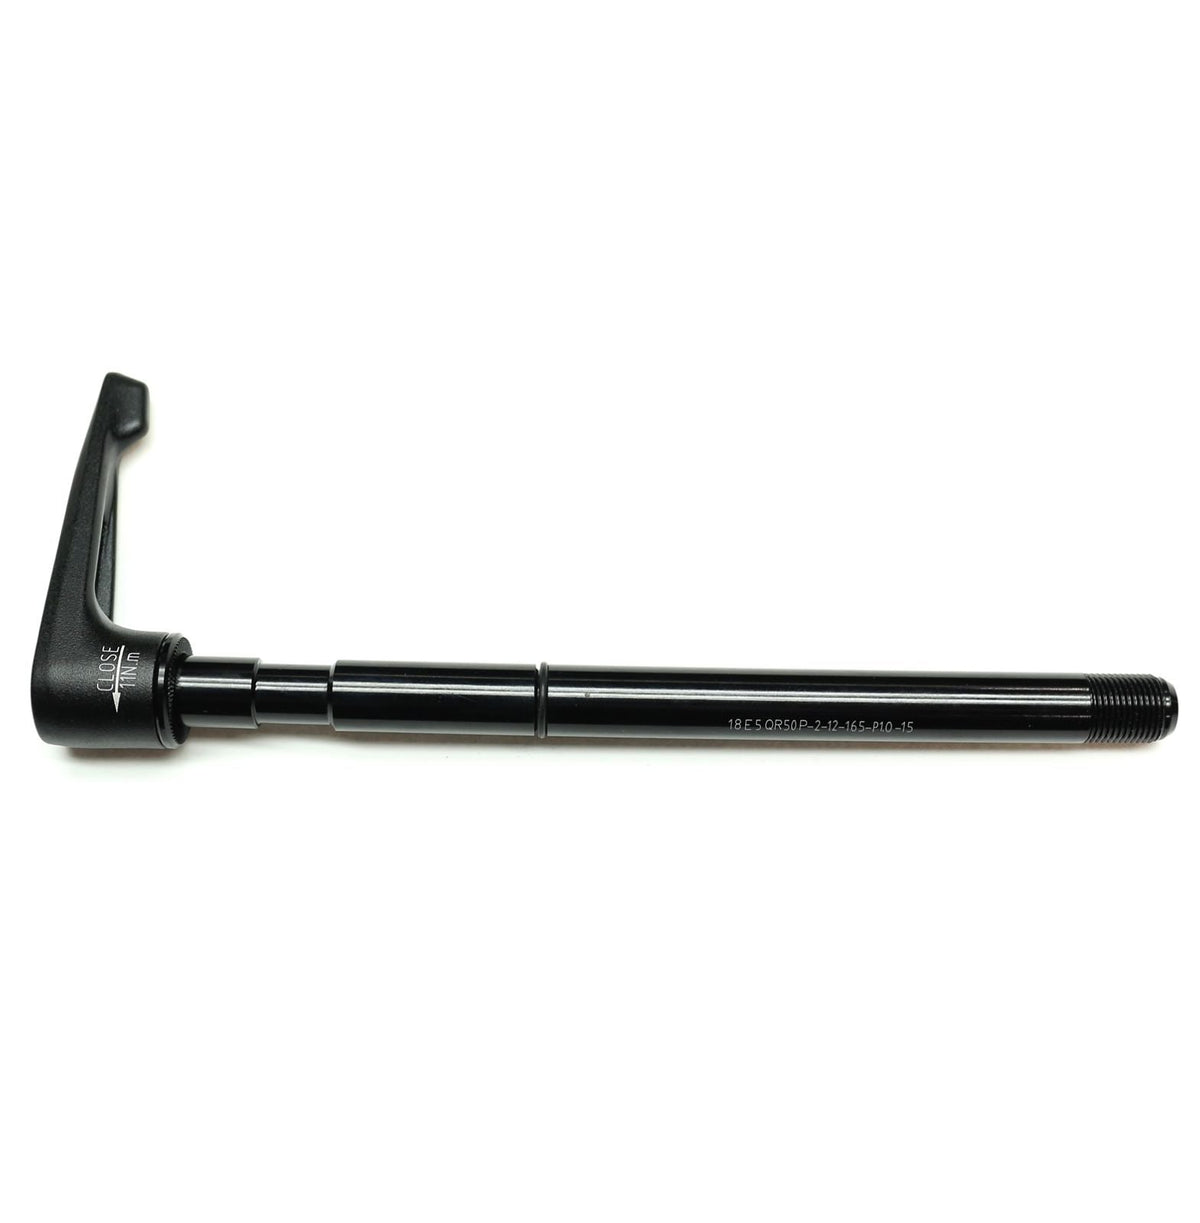 Cannondale Speed Release Ratchet Thru Axle - 12x142